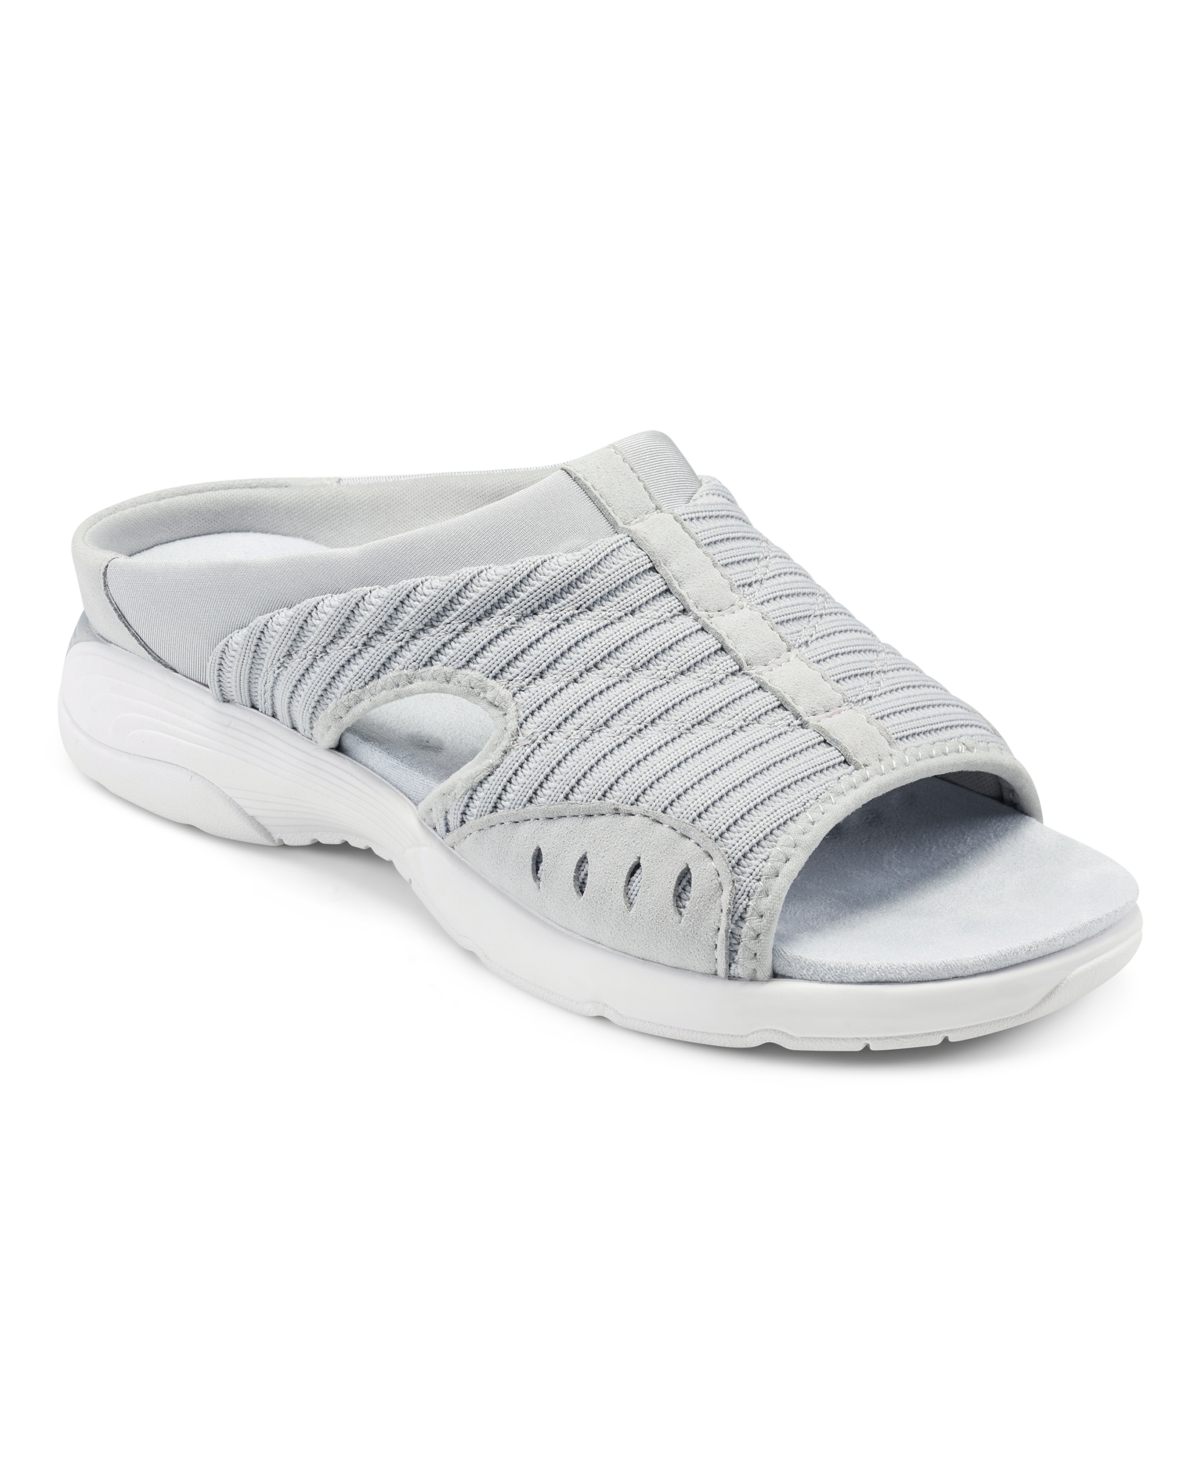 Easy Spirit Women's Traciee Square Toe Casual Slide Sandals Women's Shoes In Silver Khaki